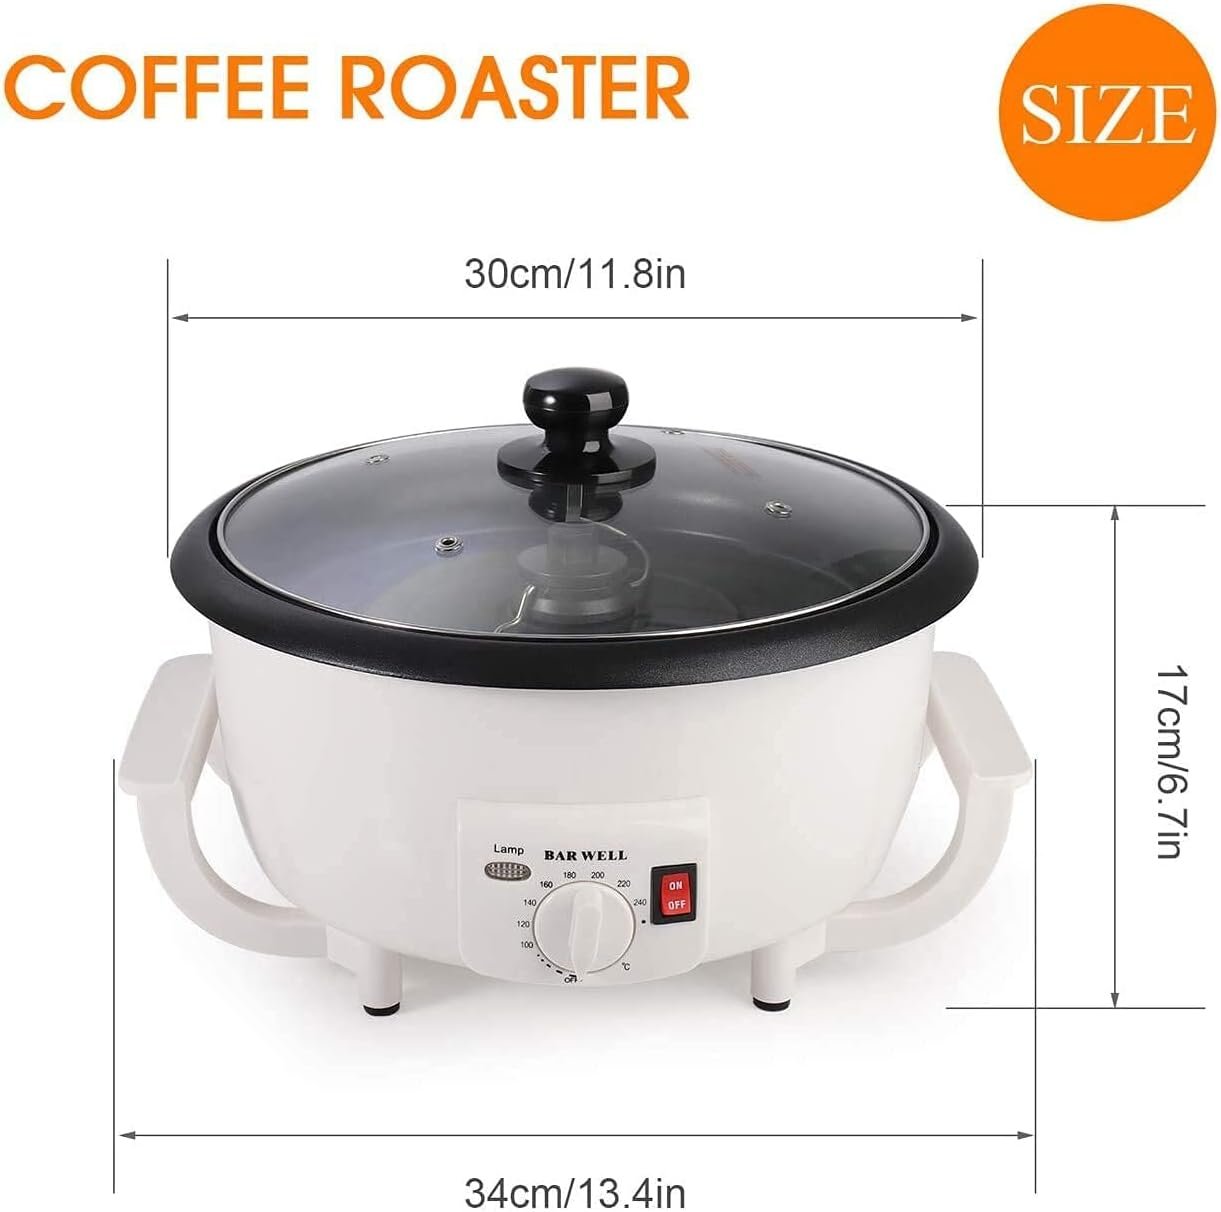 OKYUK Household Coffee Roaster 110V Electric Coffee Beans Roasting Baker Machine 750g Capacity Non-Stick Coating Baking Tools for Cafe Store Home